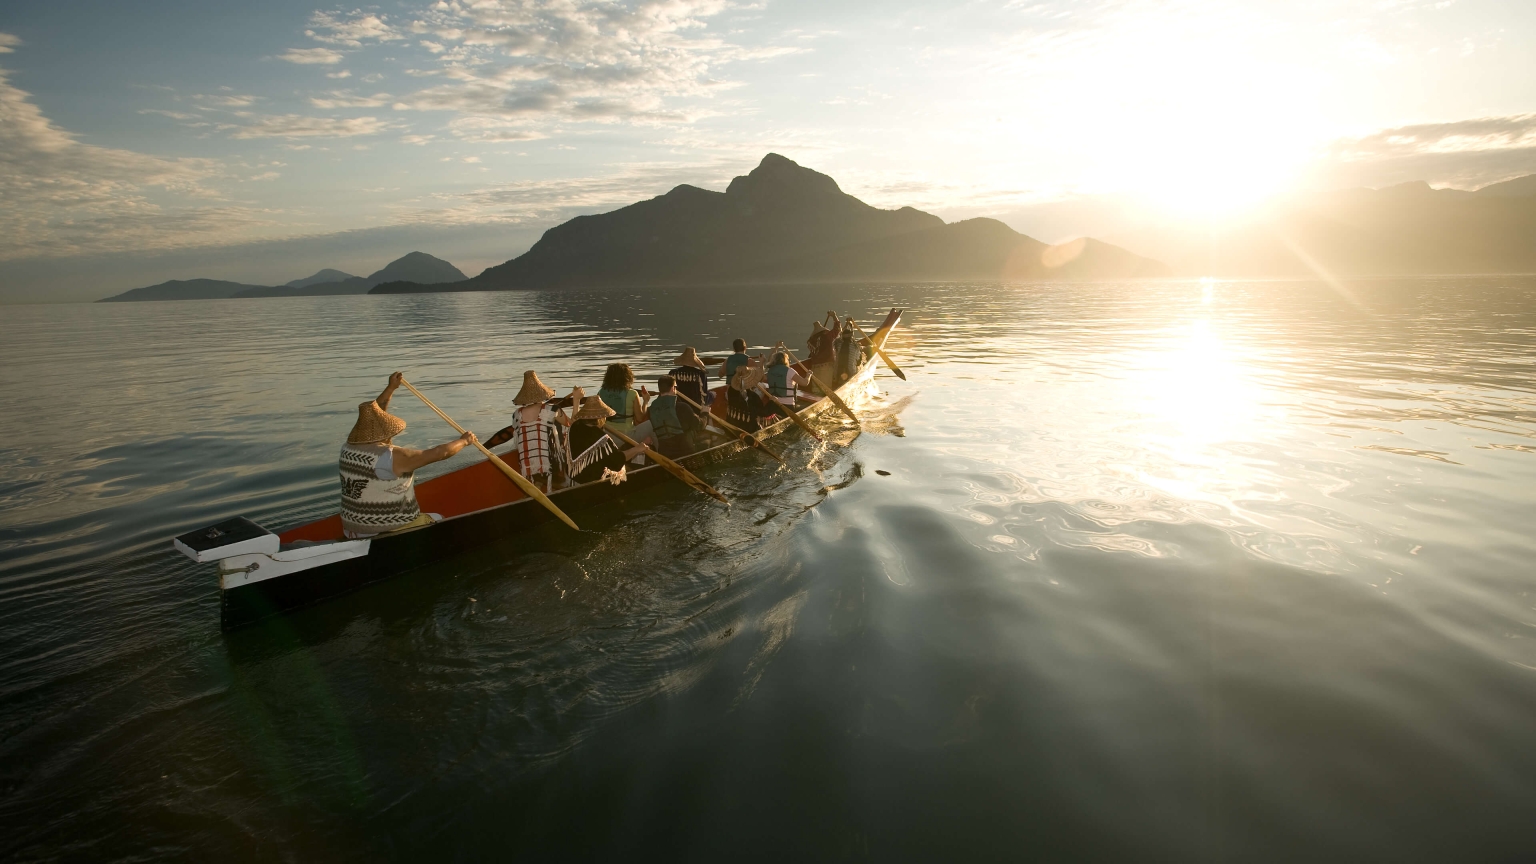 Rowing a traditional Indigenous canoe in Howe Sound